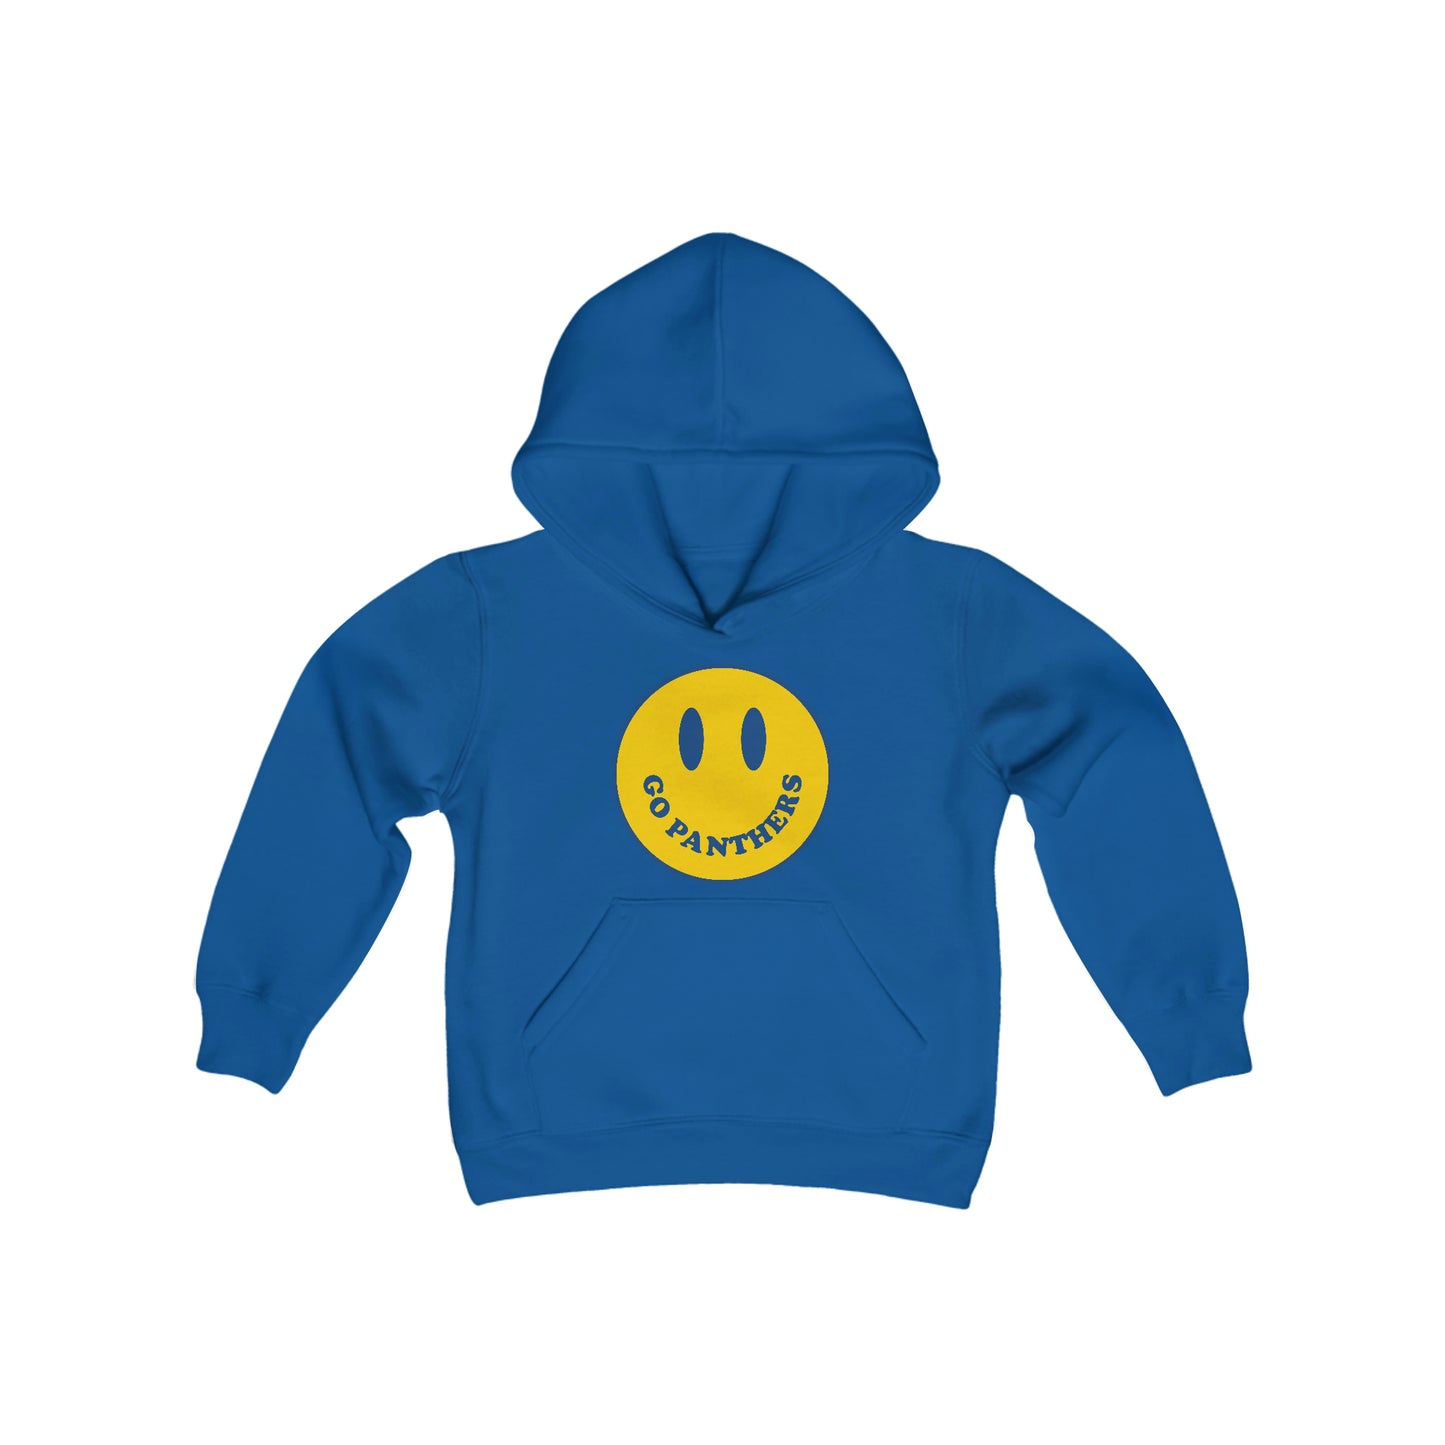 Go Panthers Smiley Youth Hoodie